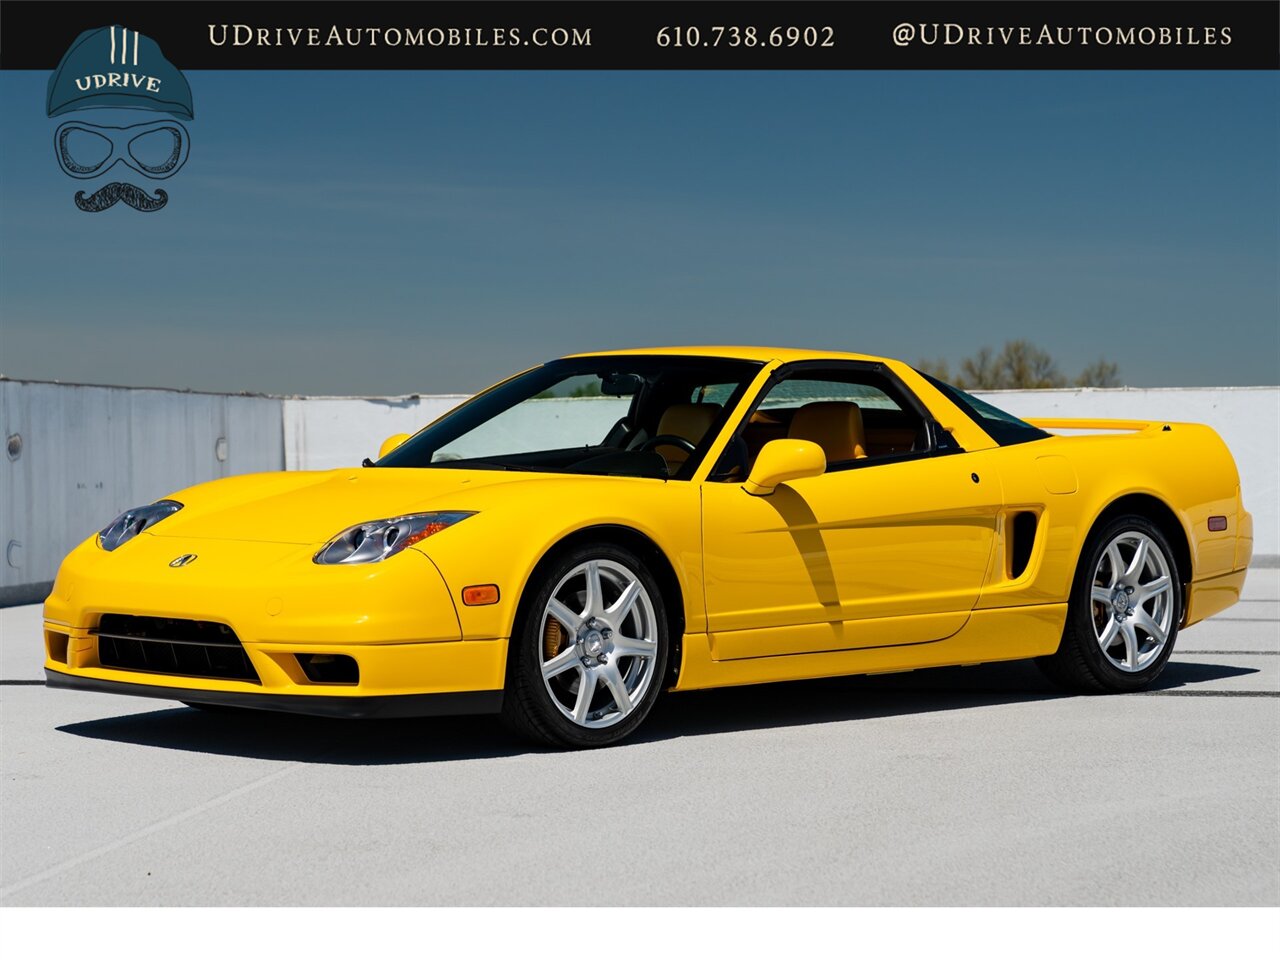 2003 Acura NSX NSX-T  Spa Yellow over Yellow Lthr 1 of 13 Produced - Photo 11 - West Chester, PA 19382